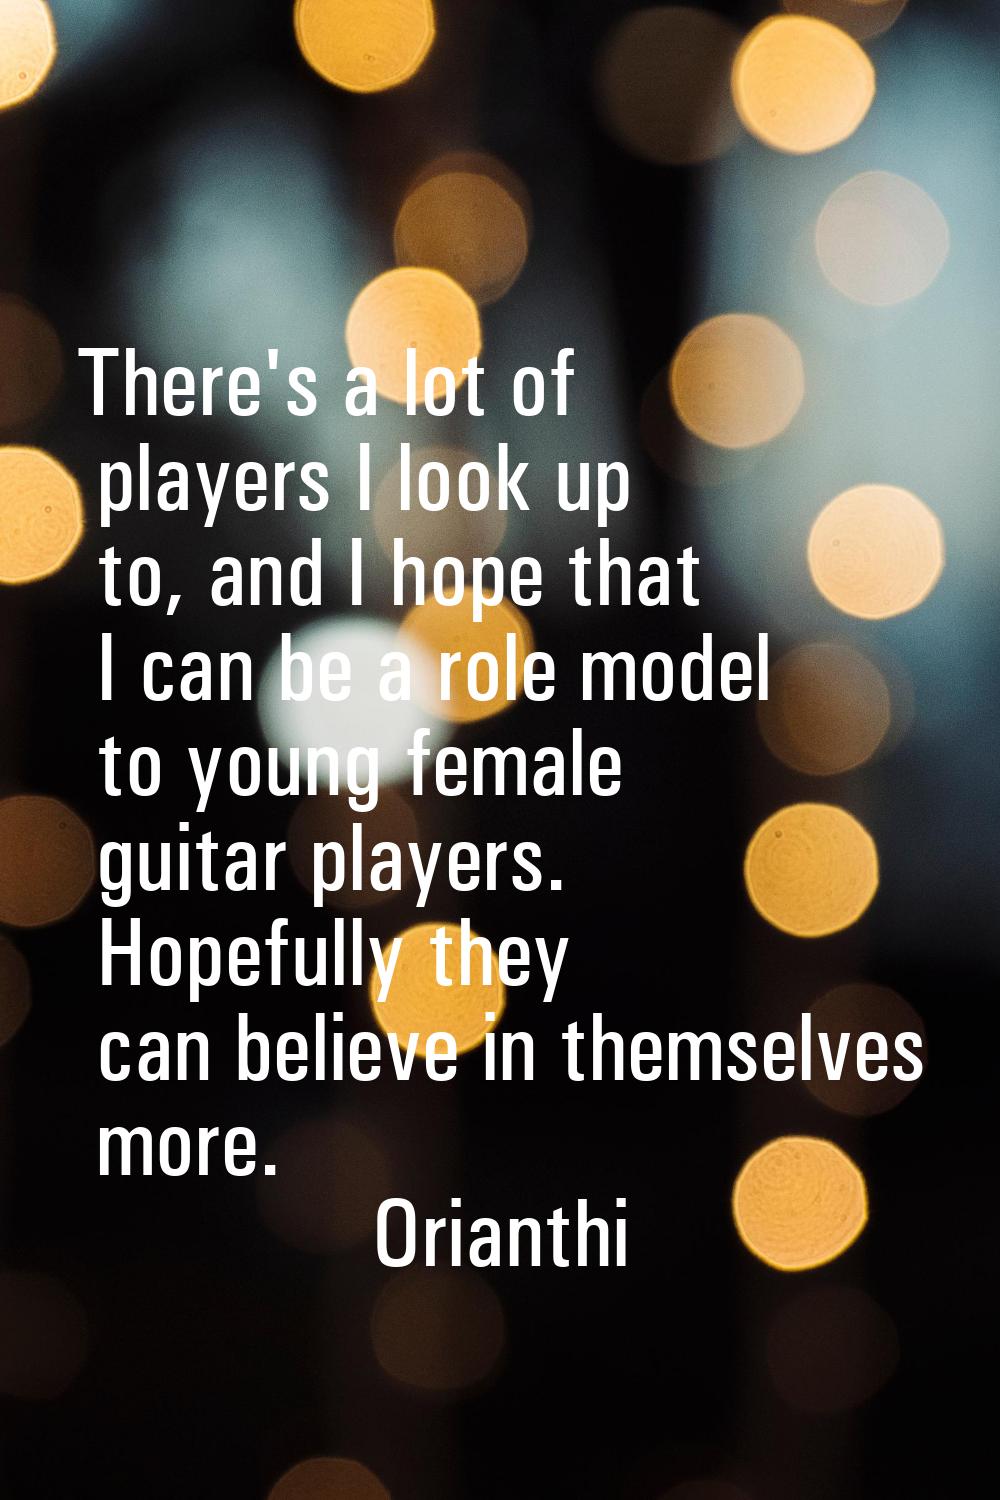 There's a lot of players I look up to, and I hope that I can be a role model to young female guitar